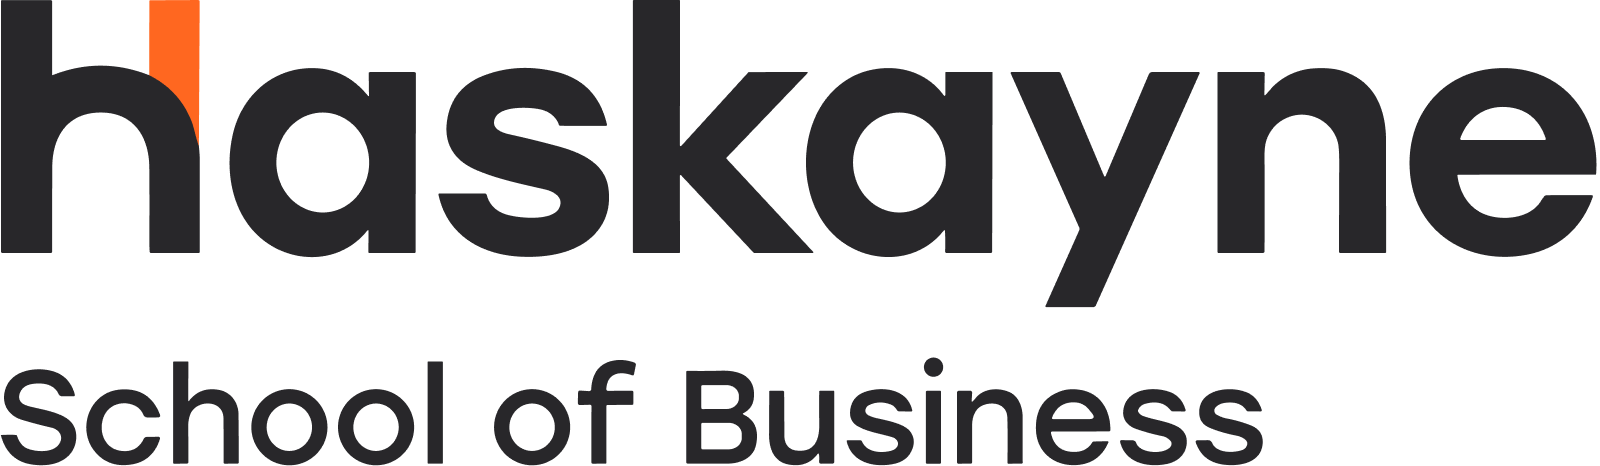 Logo for Haskayne School of Business on a transparent background